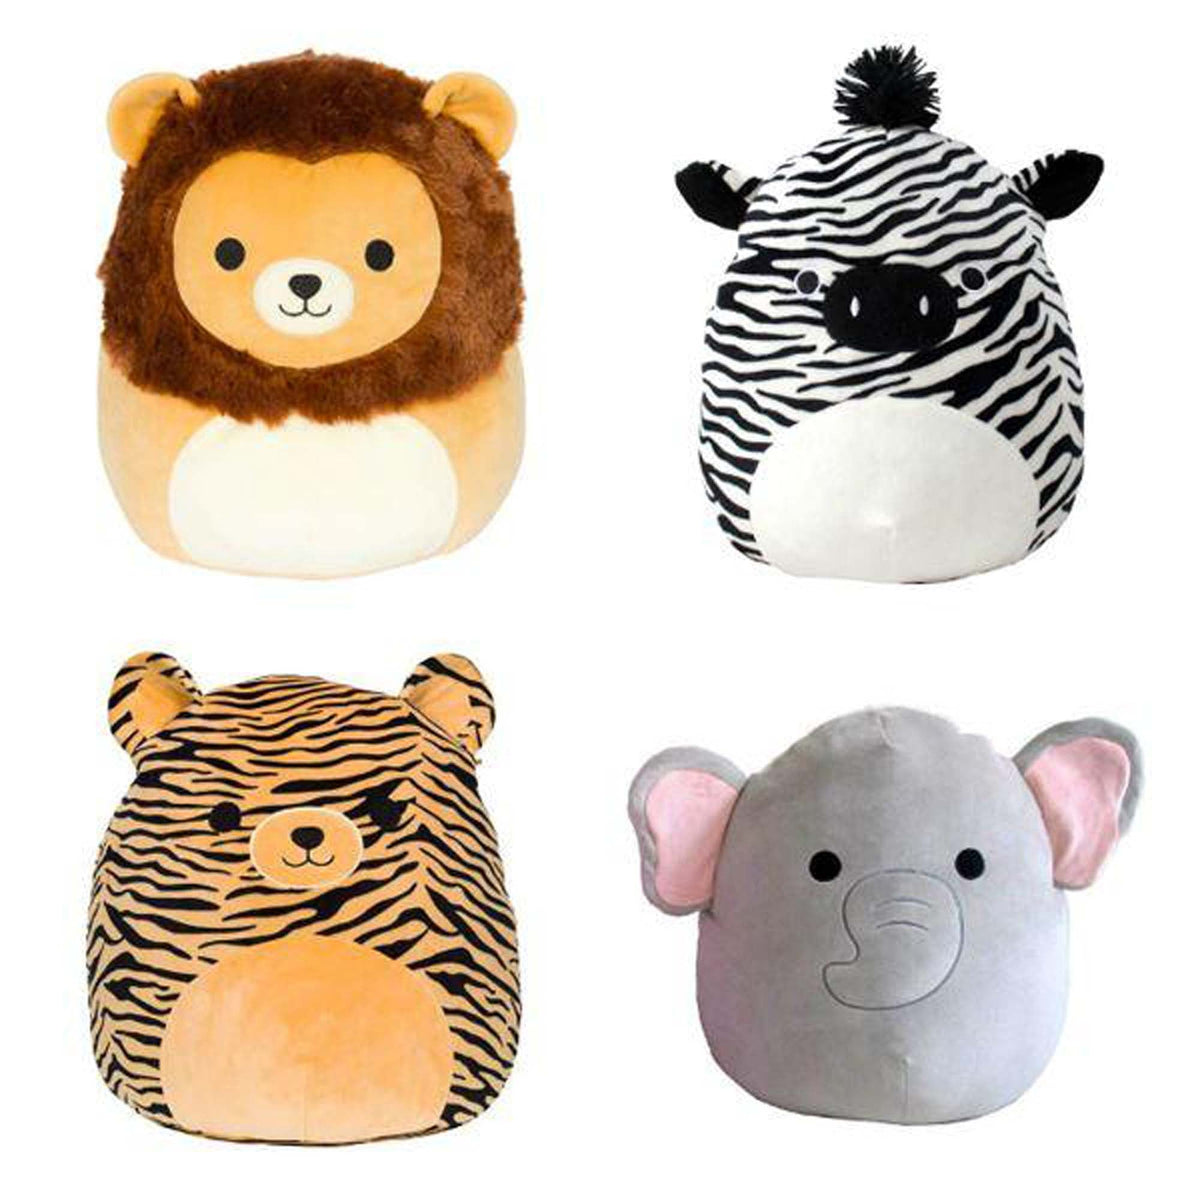 ROYAL SPECIALTY SALES Plushes Jungle Animal Squishmallow Plush, 8 Inches, Assortment, 1 Count 734689953981